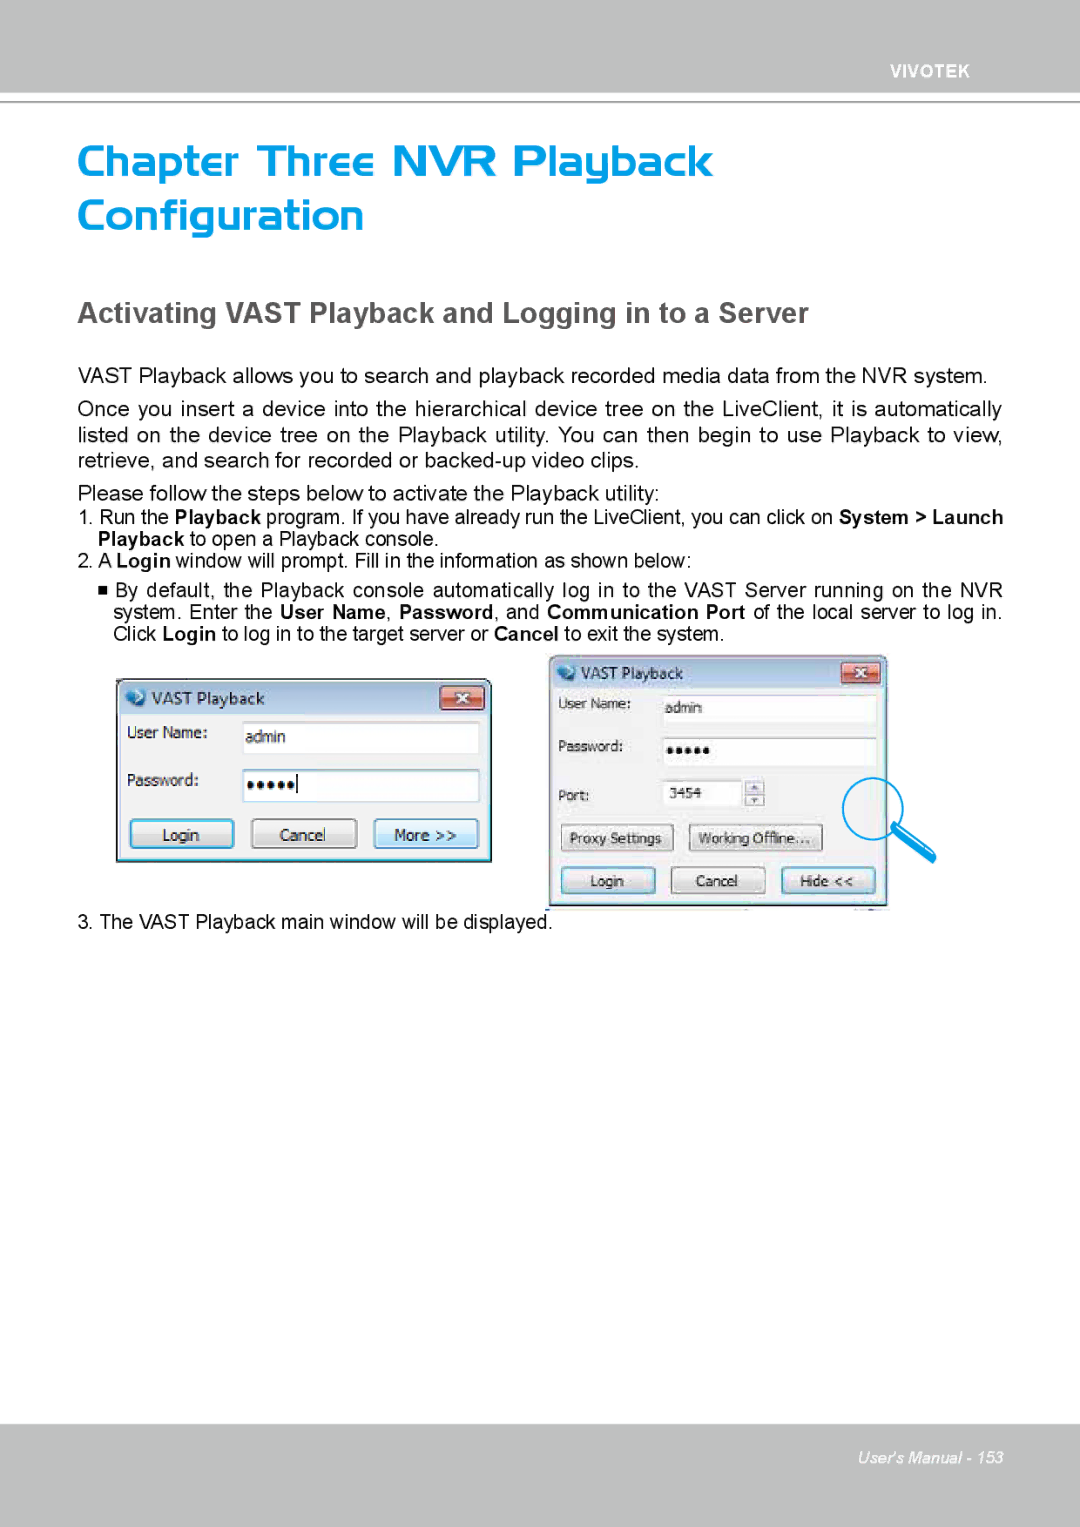 Vivotek ND4801 user manual Chapter Three NVR Playback Configuration, Activating Vast Playback and Logging in to a Server 